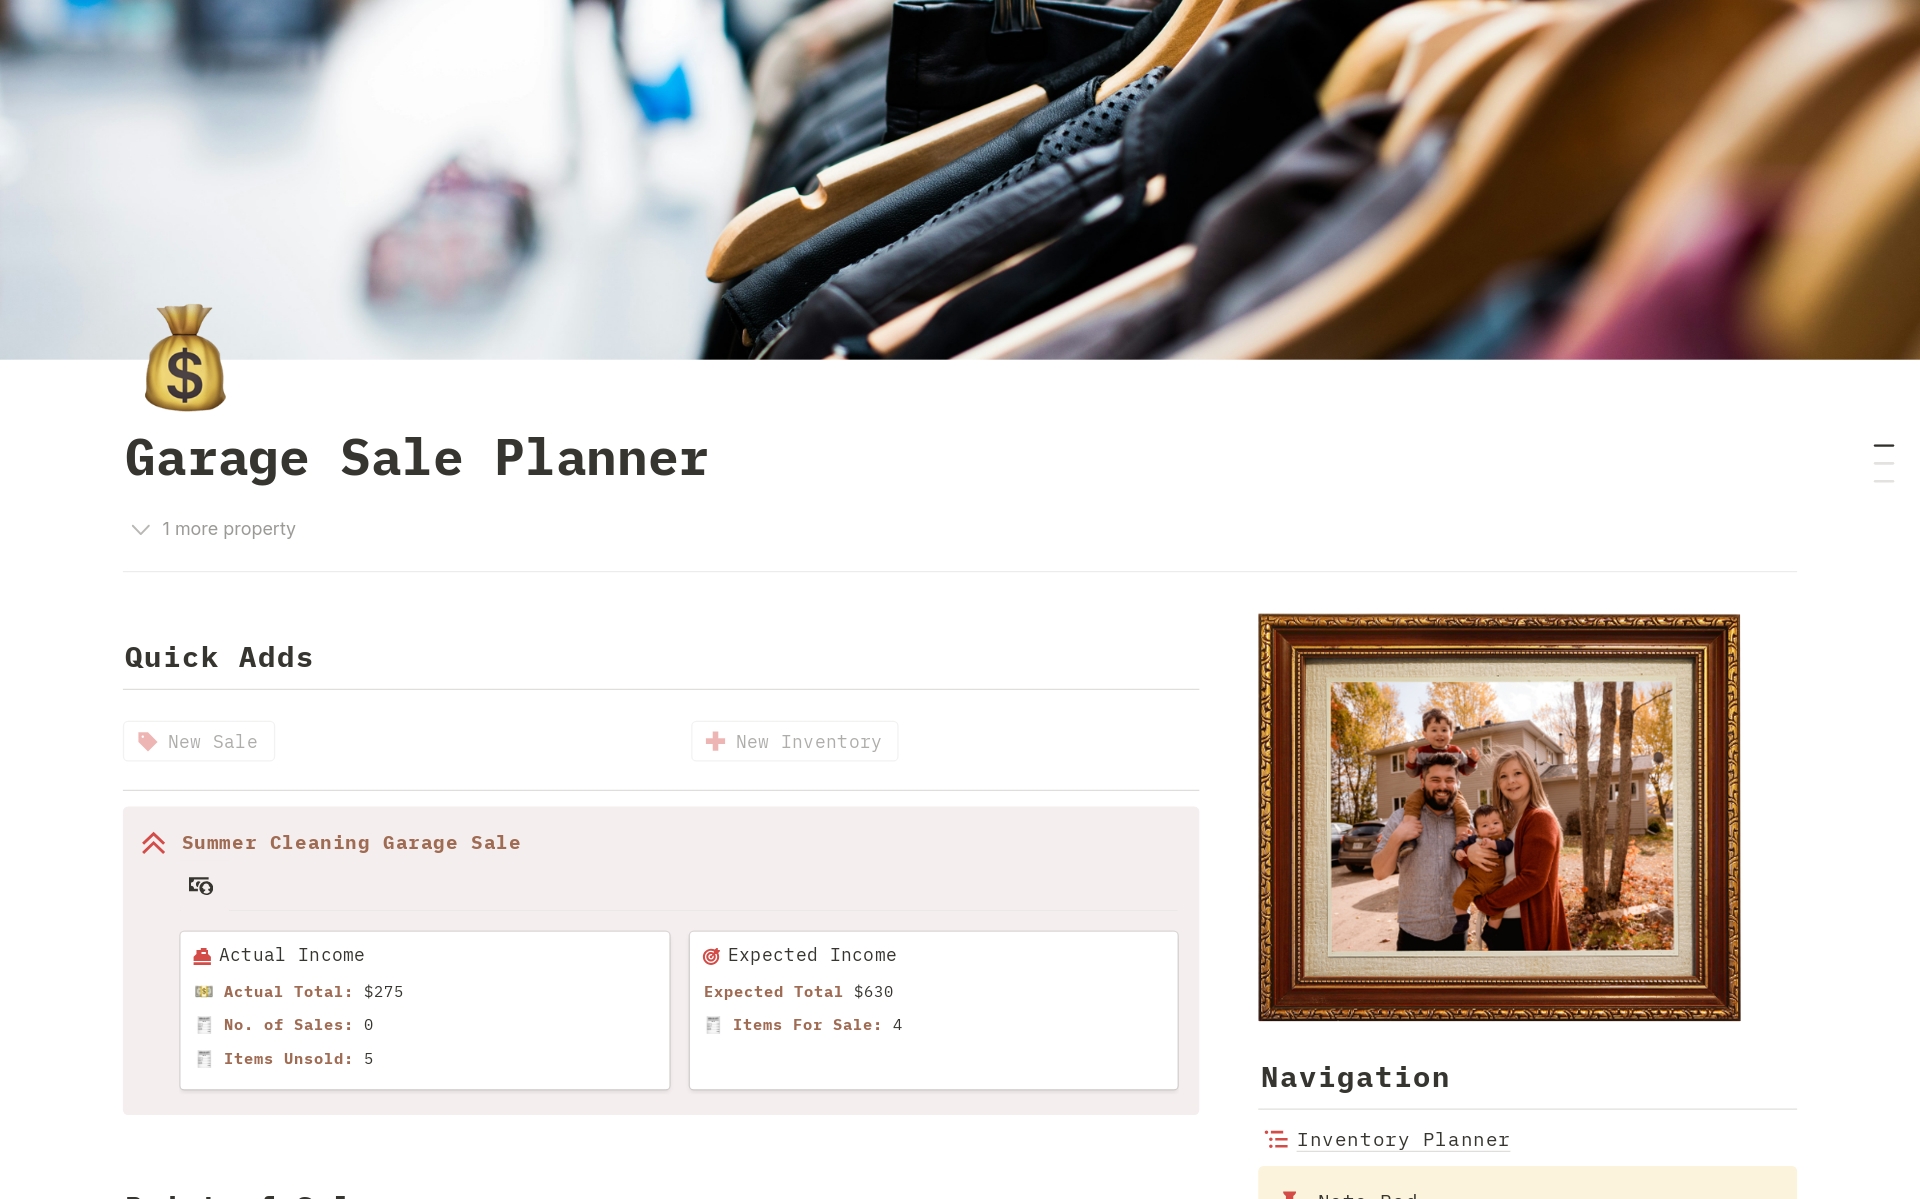 Introducing our estate sale Notion template, complete with an estate sale log inventory tracker, estate sale spreadsheet, estate sale transaction tracker, and estate sales tracker. This elegant and user-friendly toolkit simplifies organizing and managing your estate sale, ensurin